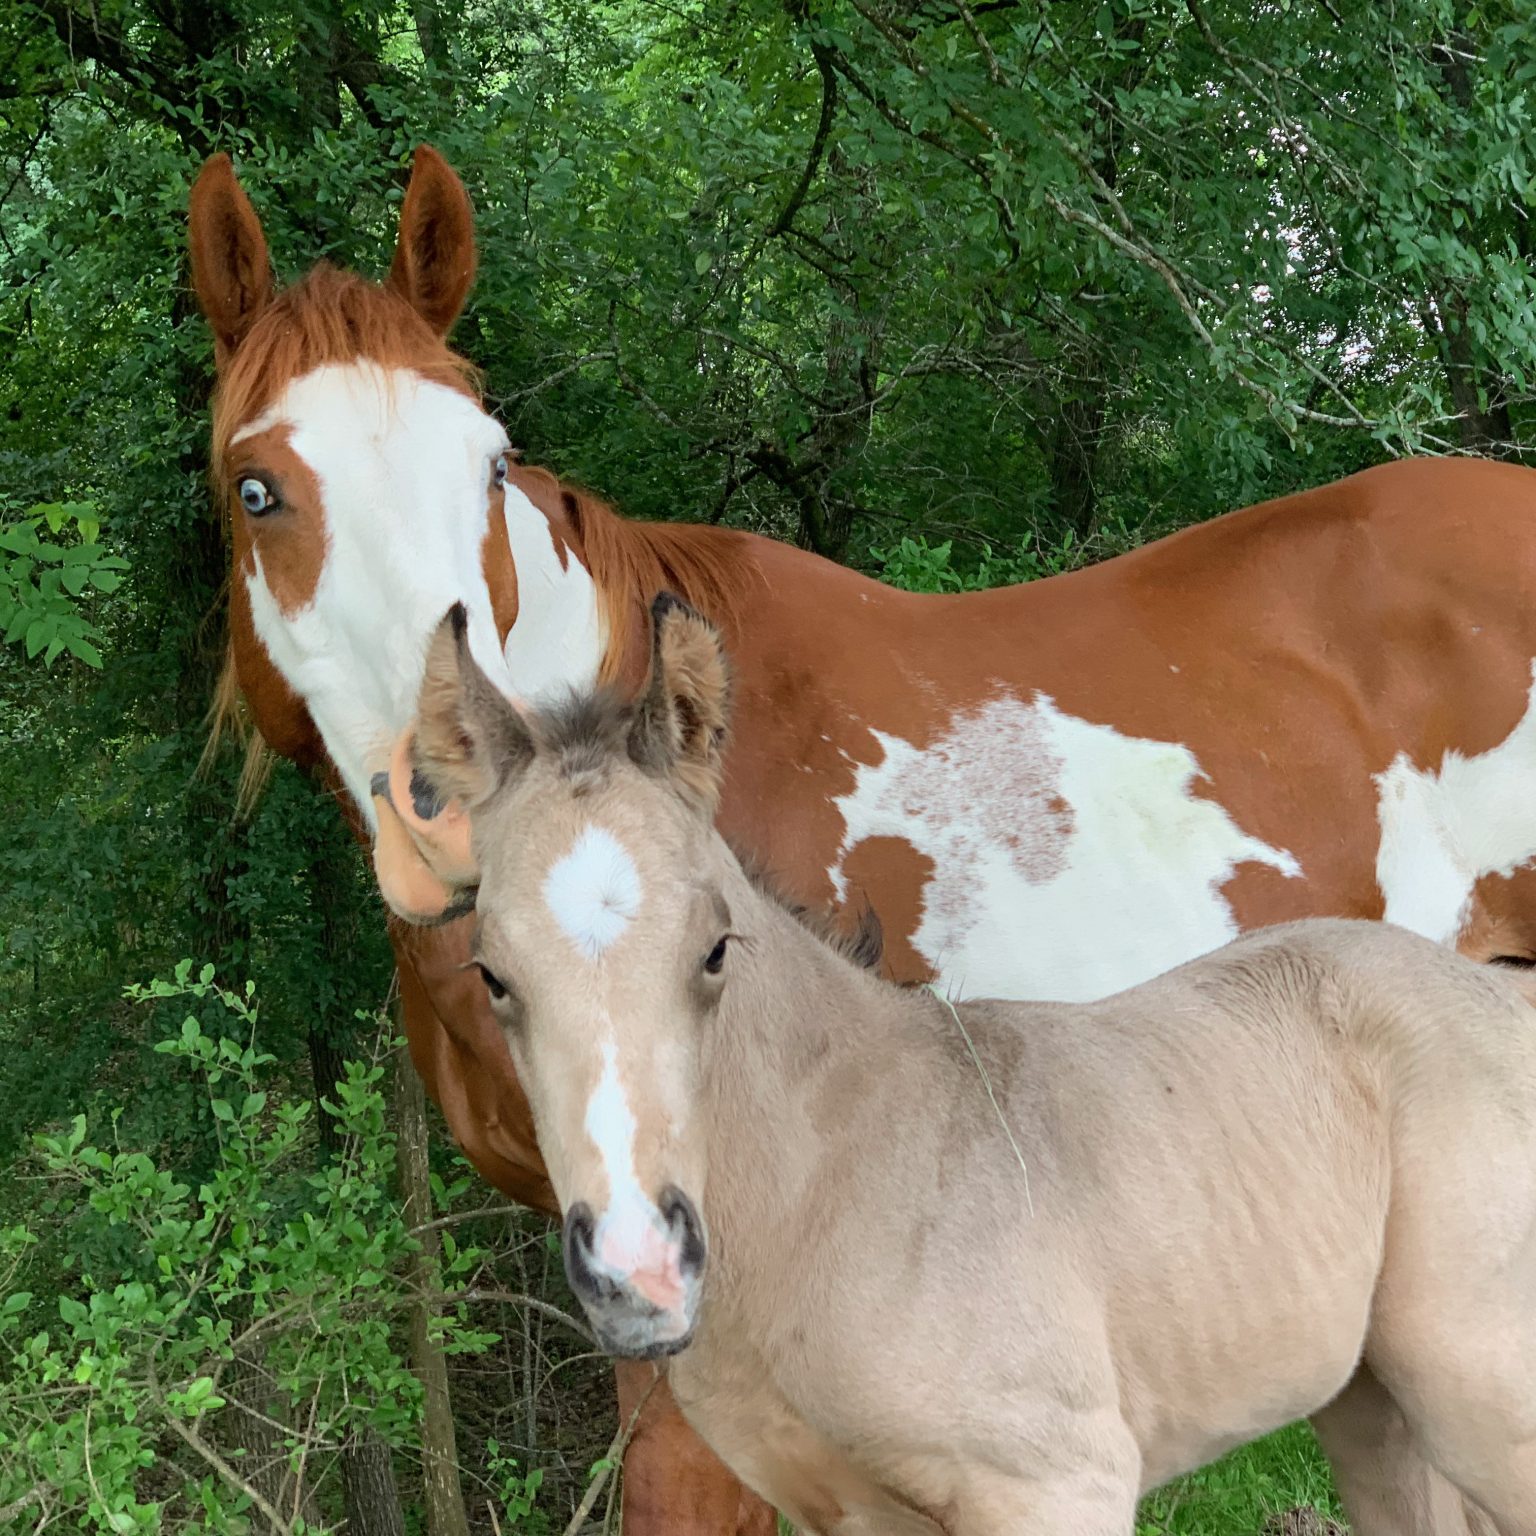 Austin dude ranch offers photo shoots for horse and rider, engagement photos and more!  Pictured here is a photo favorite, Annie Up and her baby, Chi